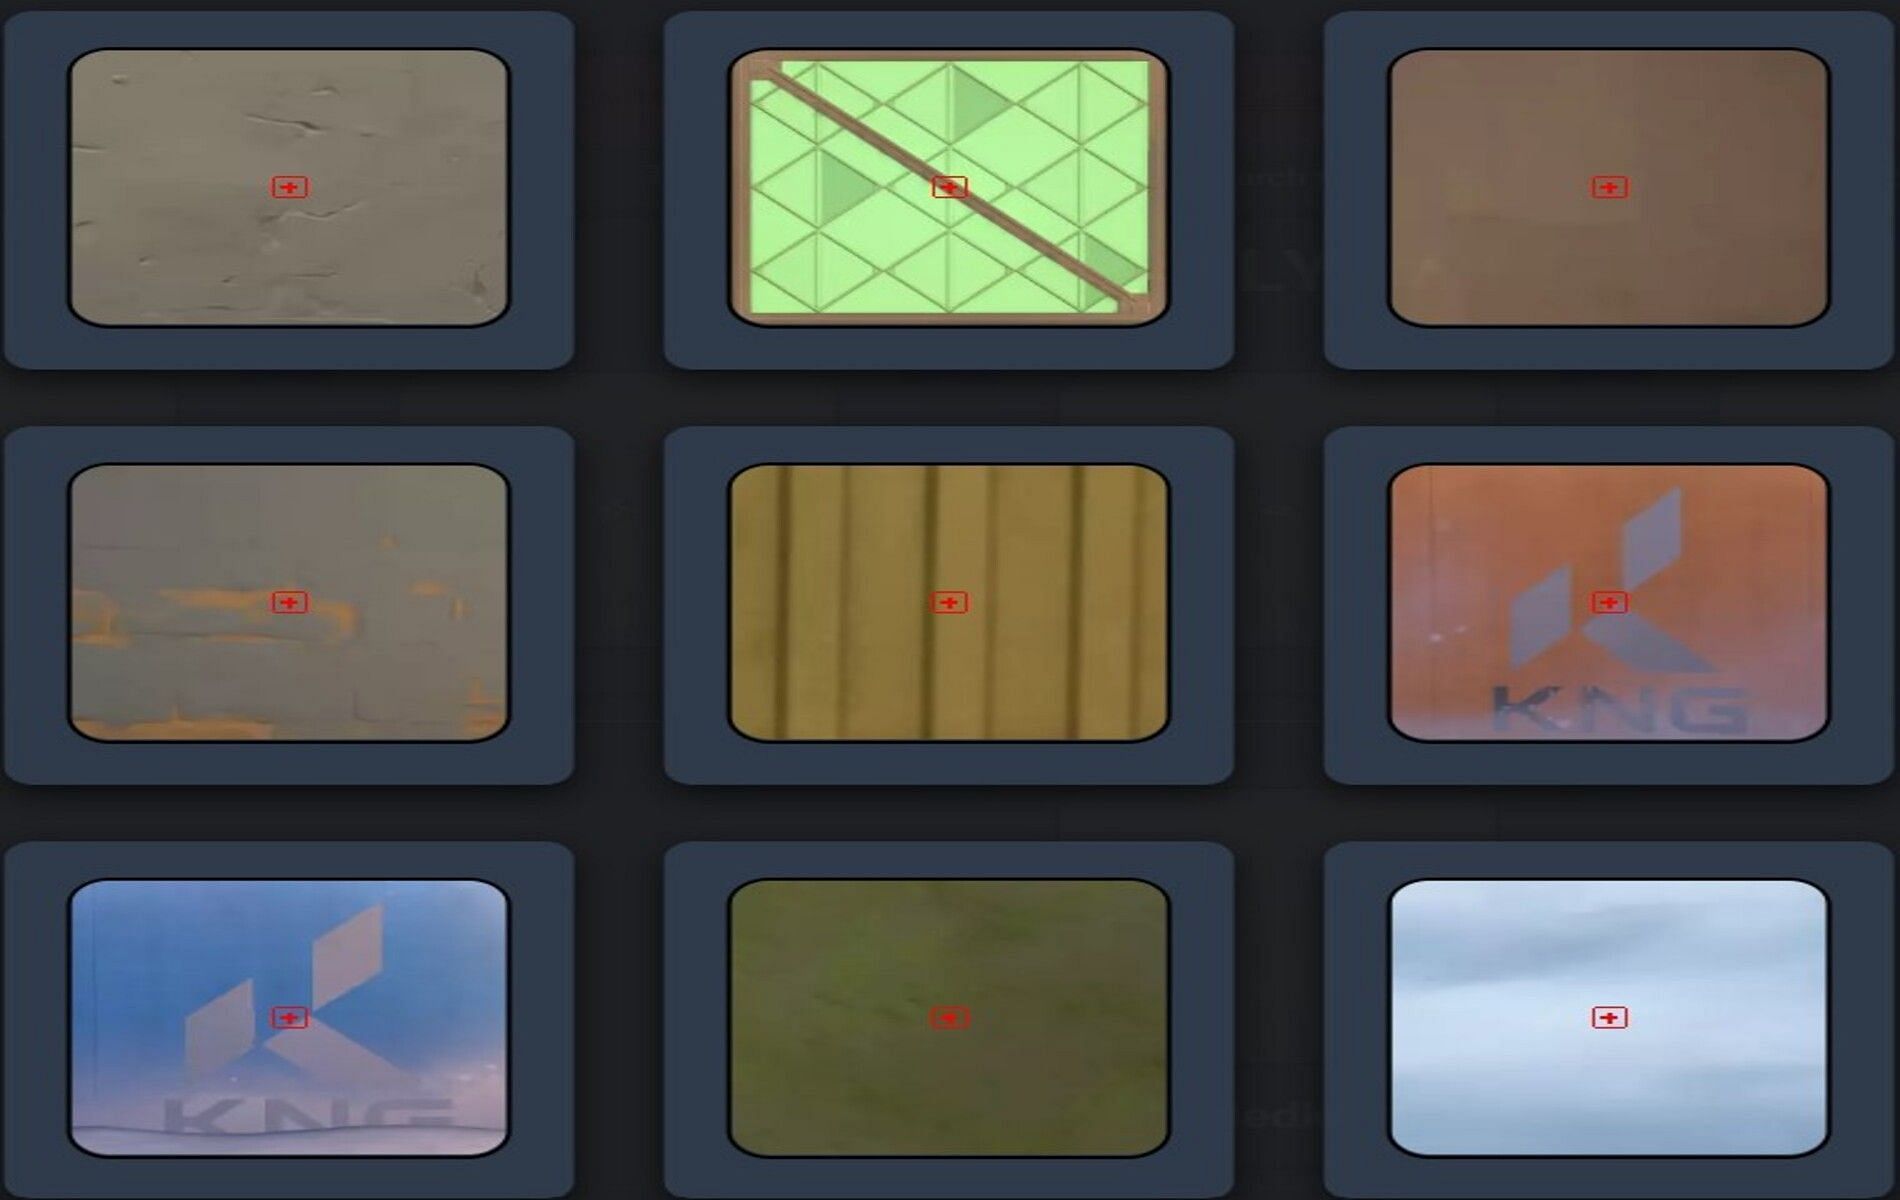 The medkit crosshair in Valorant and how it appears on different surfaces in the game. (Image via Valorant Crosshair Database)